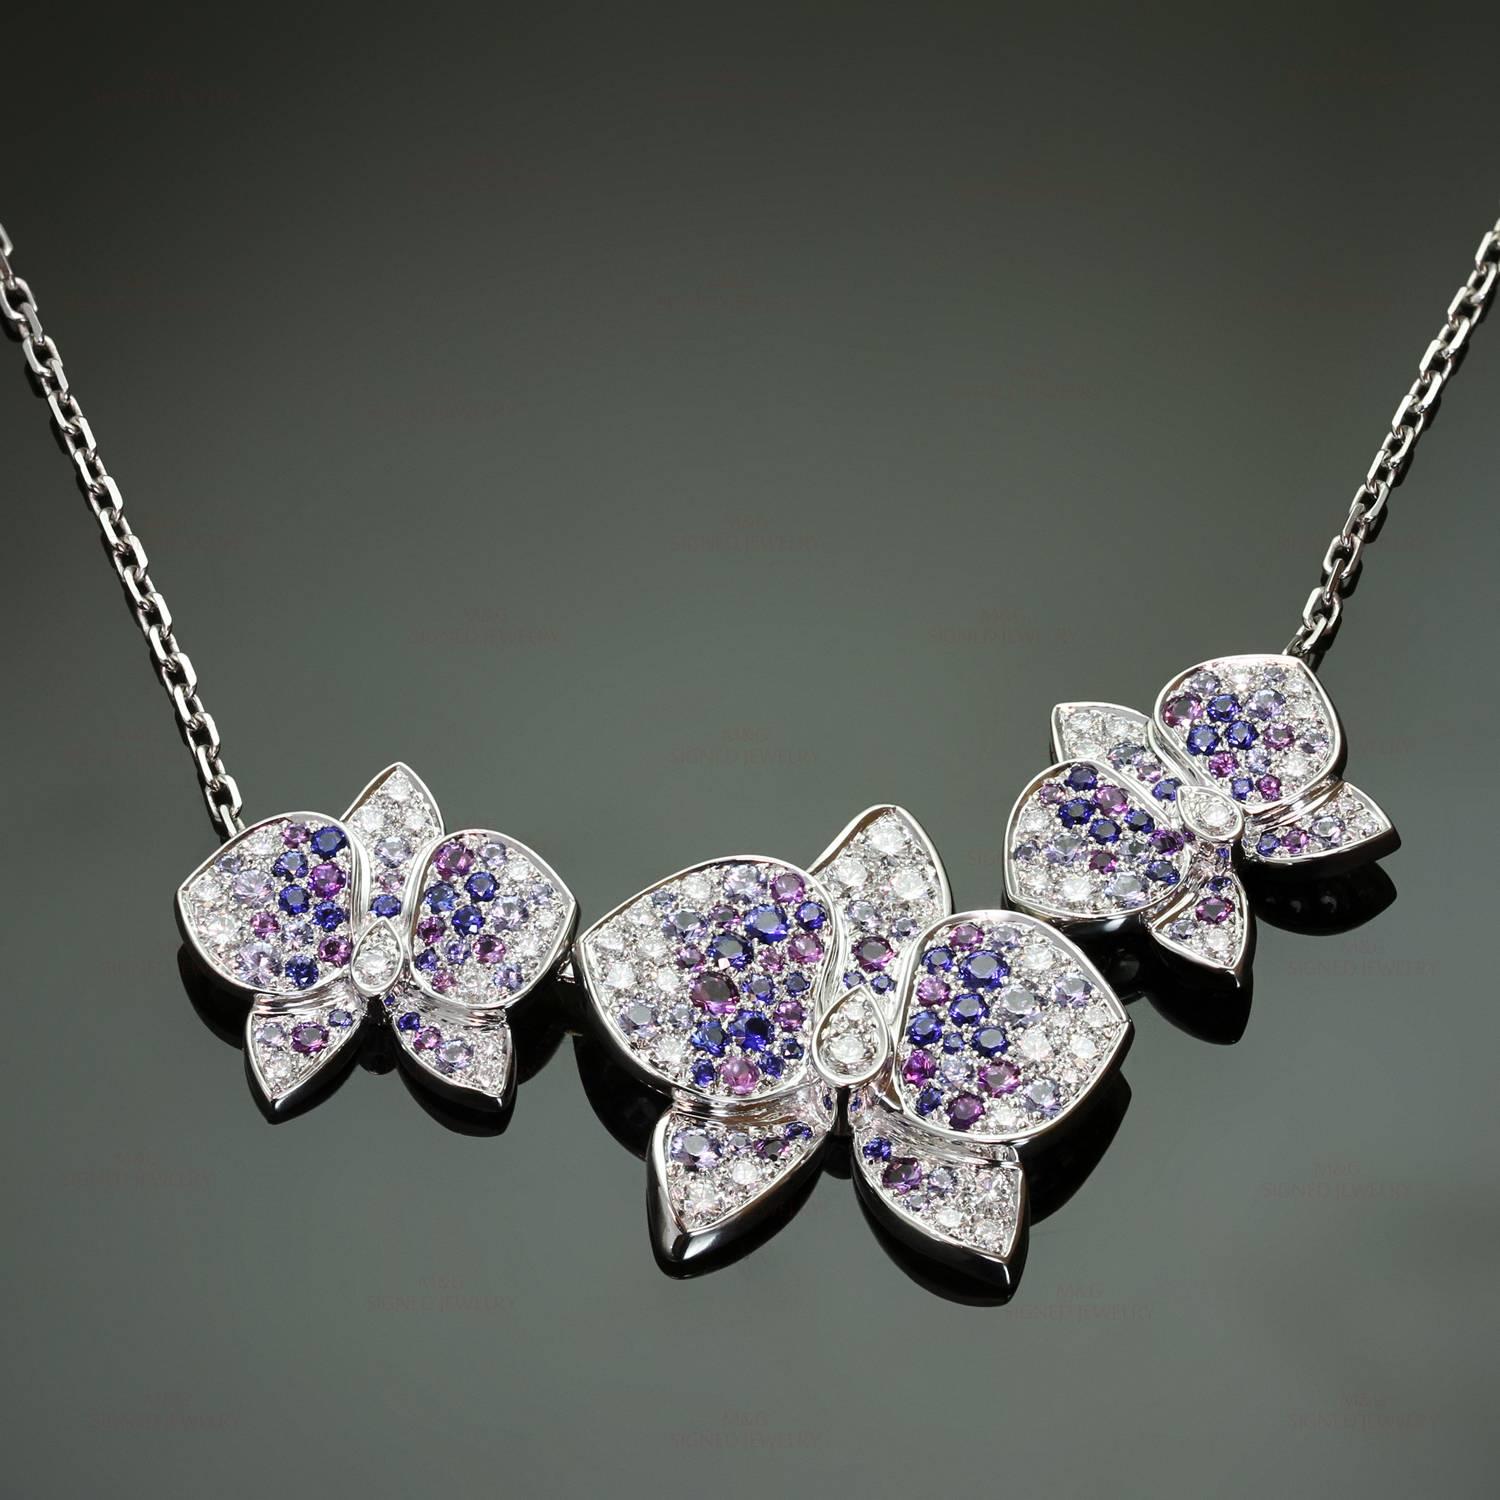 This magnificent necklace from the stunning Caresse D'Orchidees collection is crafted in 18k white gold and completed with a sparkling orchid-shaped pendant set with brilliant-cut diamonds, amethysts, and sapphires. Made in France circa 2010s.